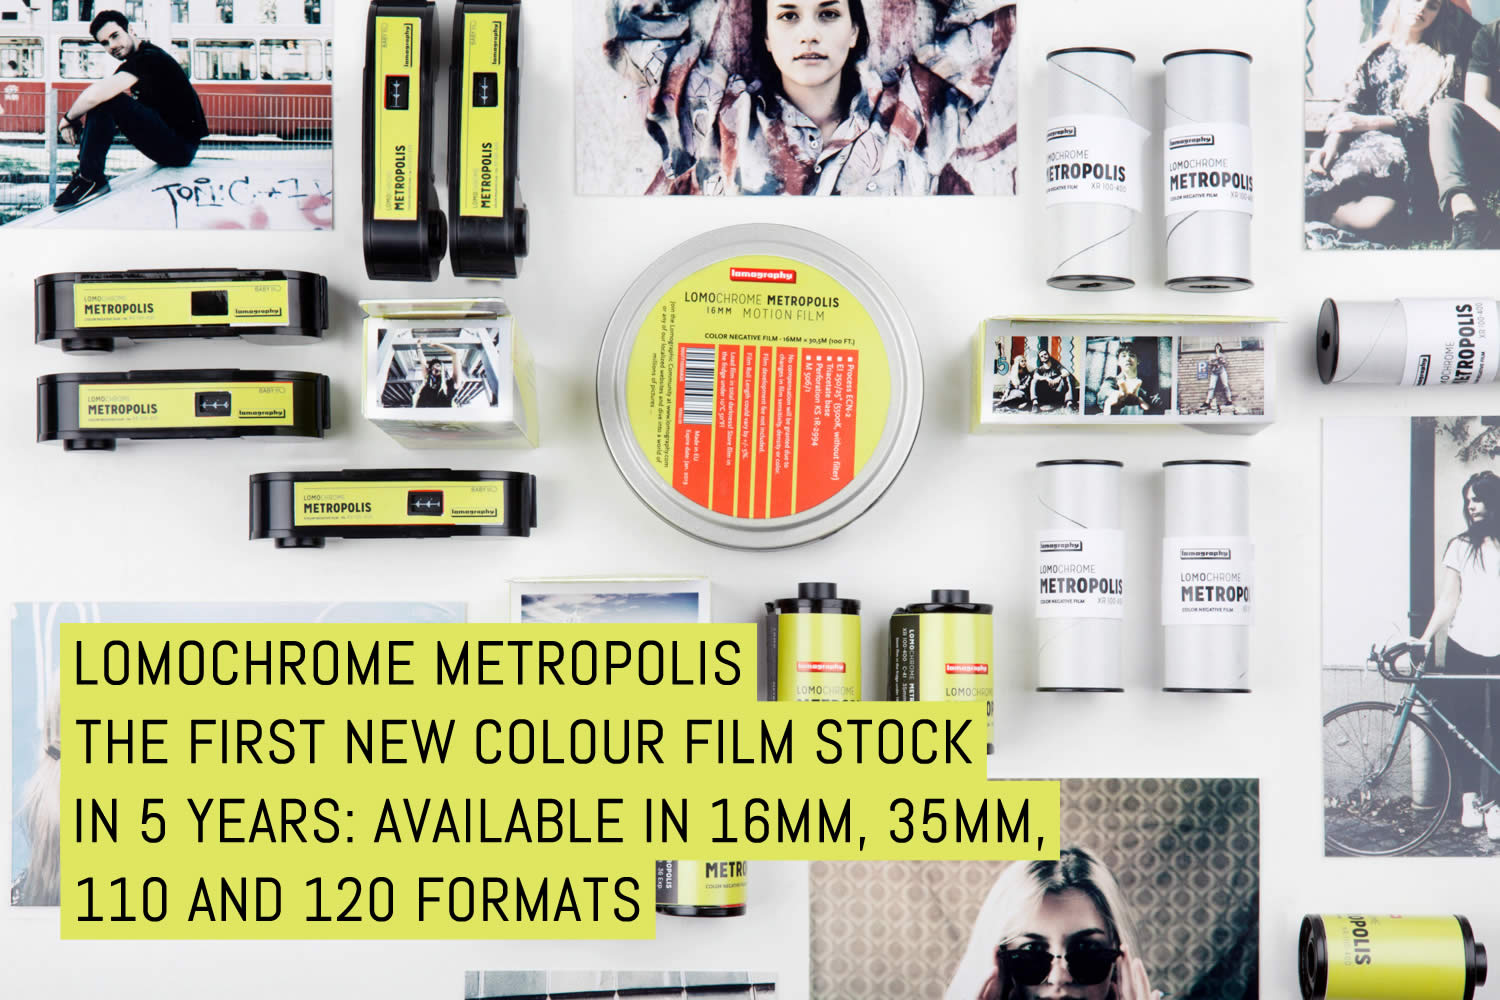 The first new colour film stock in 5 years: LomoChrome Metropolis available in 16mm, 35mm, 110 and 120 formats